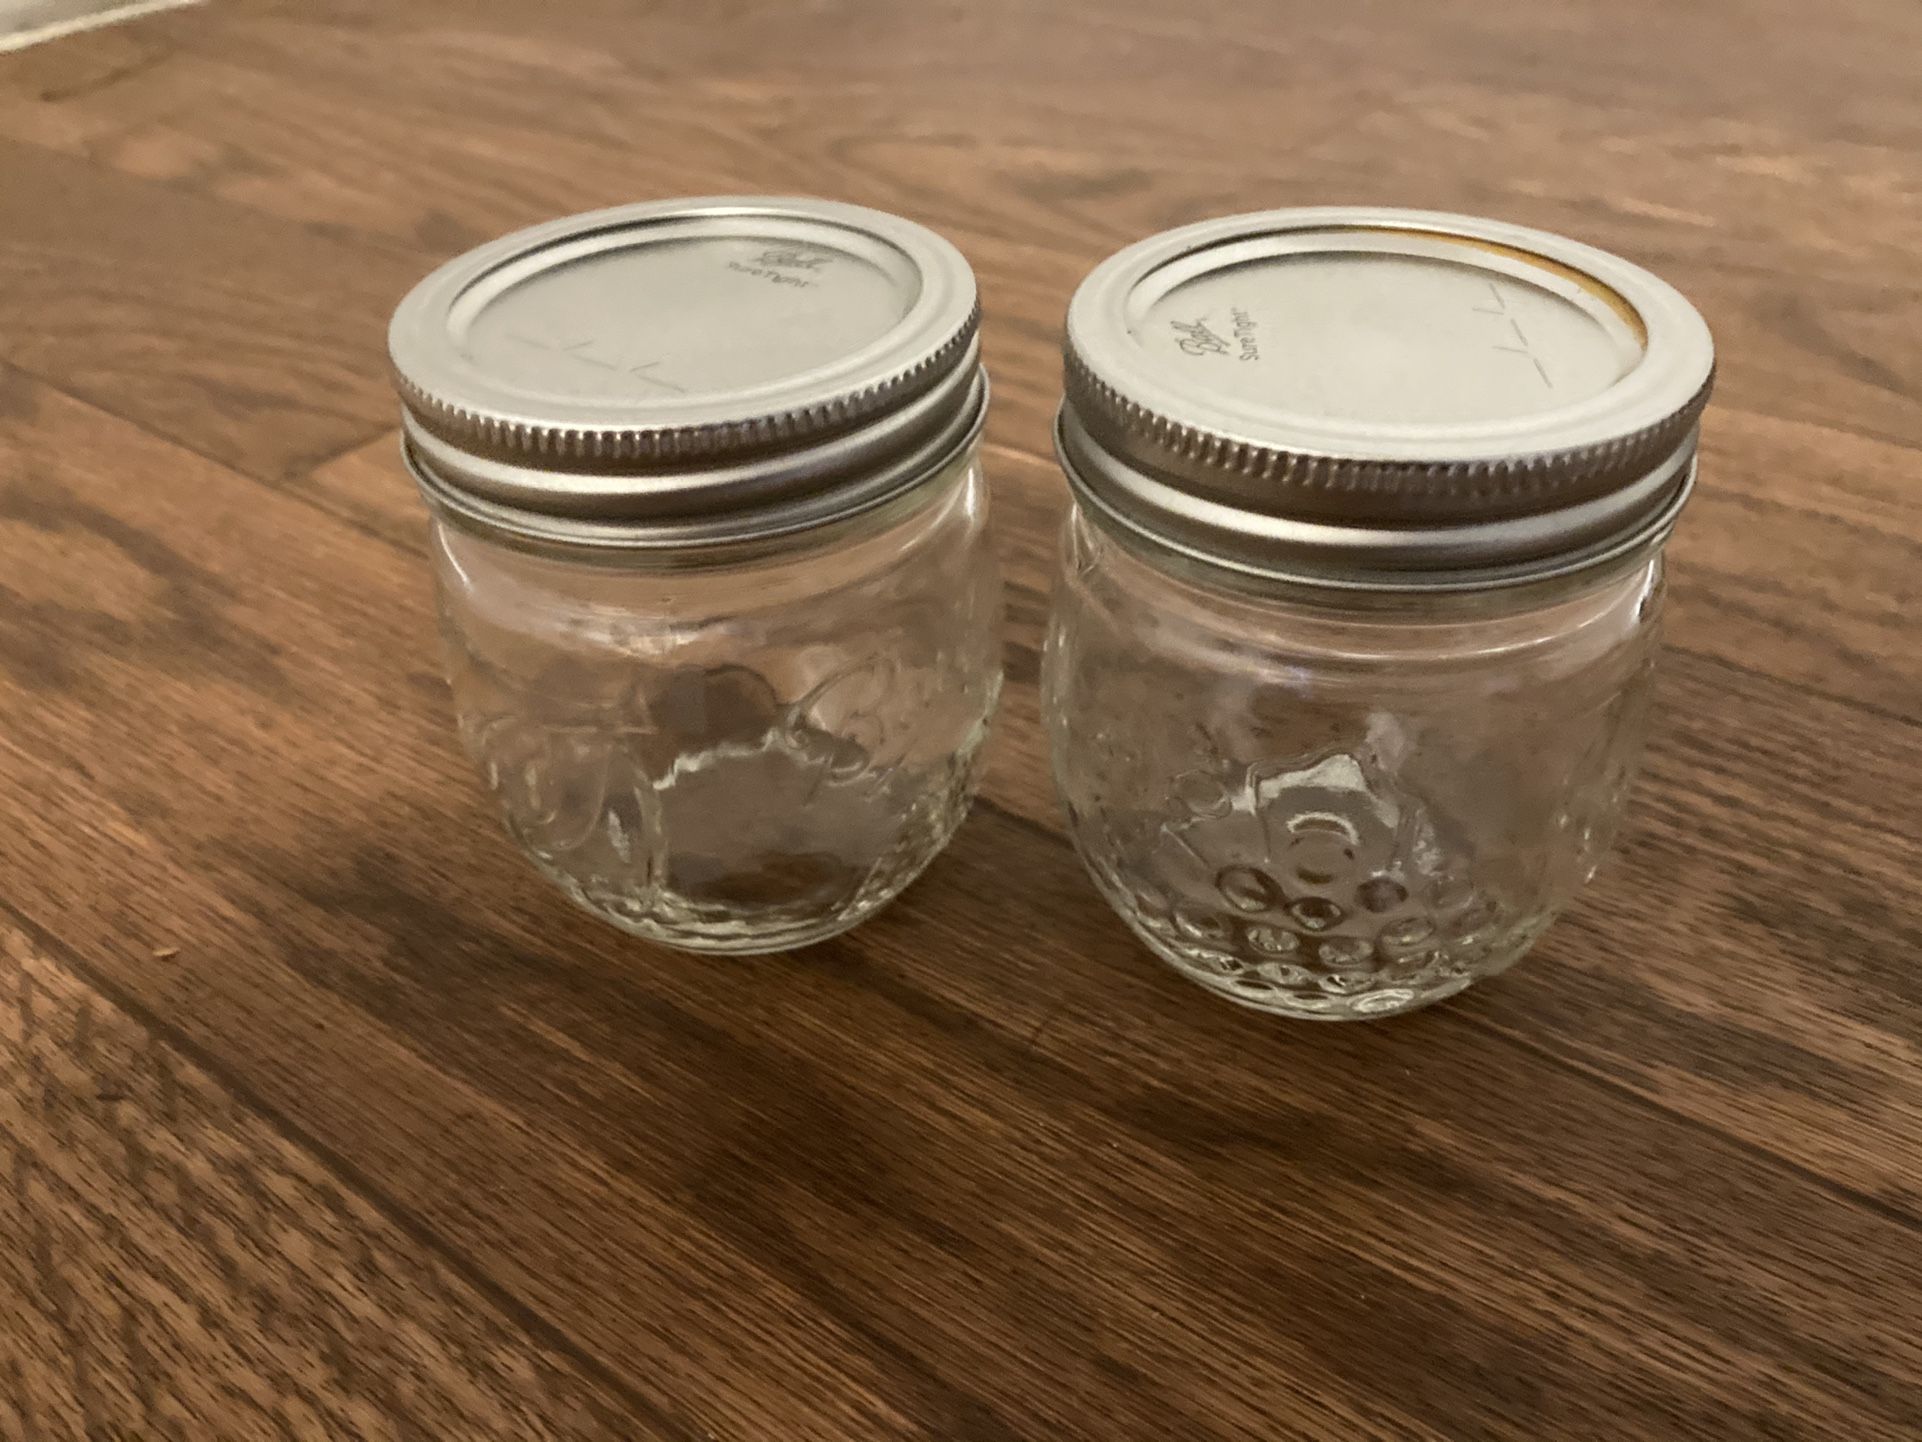 2 Small Canning Jars